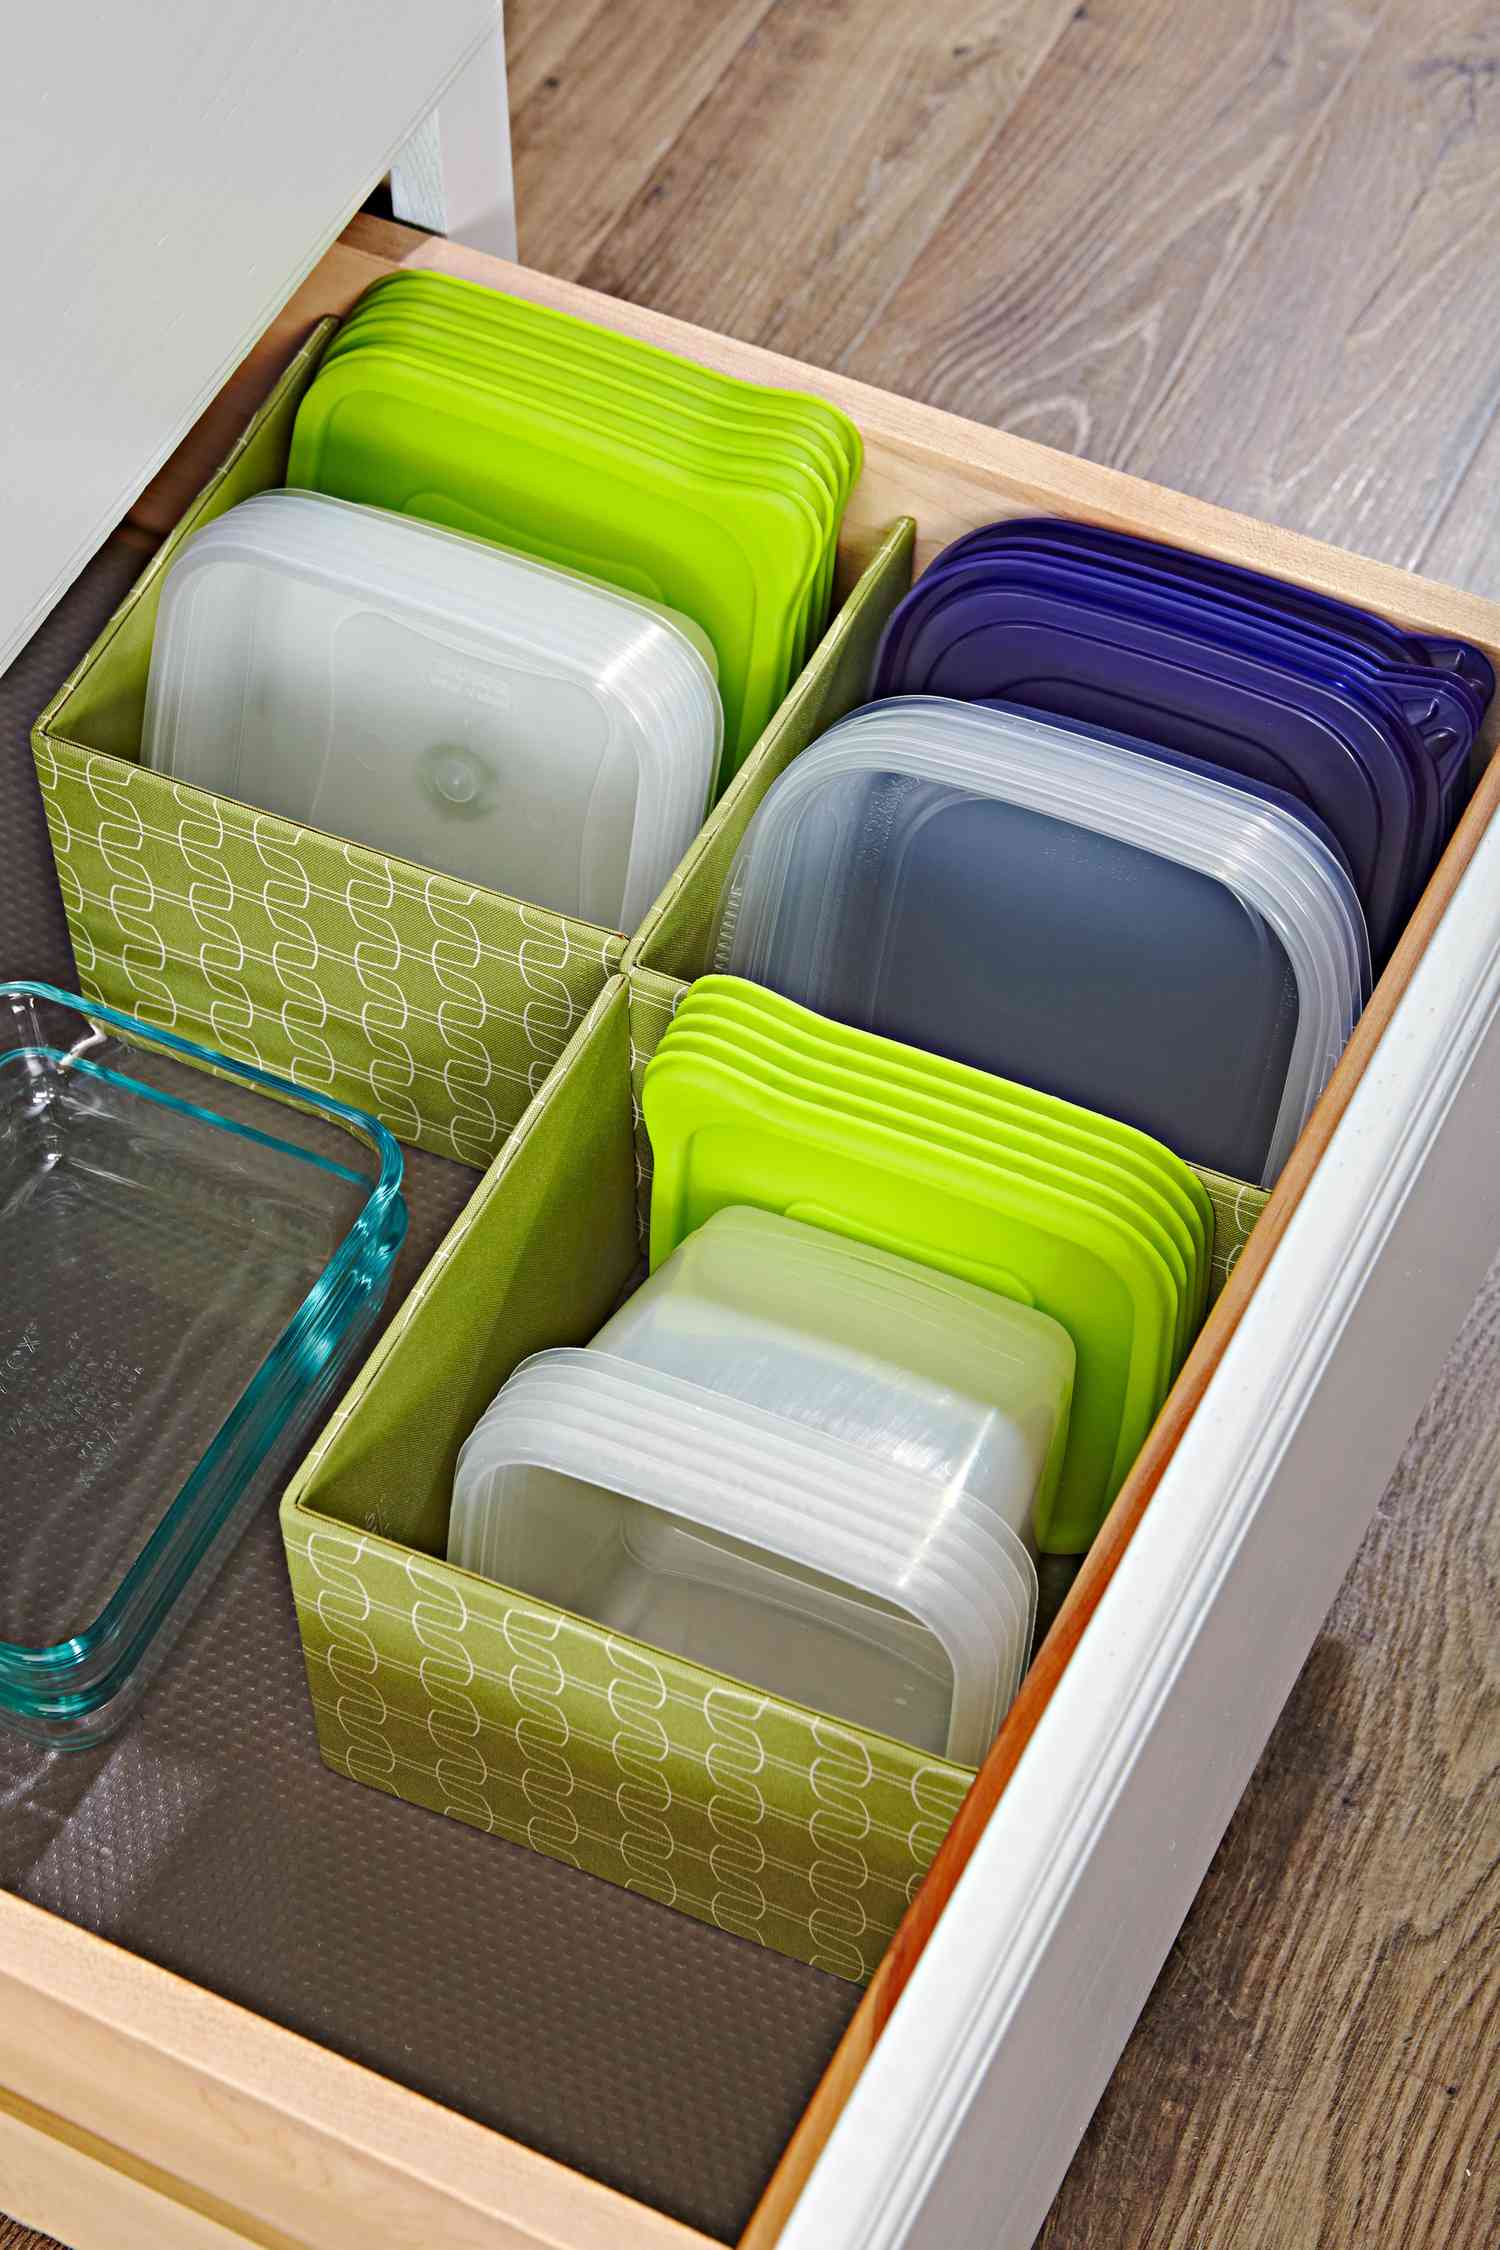 Plastic Containers Storage Ideas : Plastic Containers Lids Organize ...